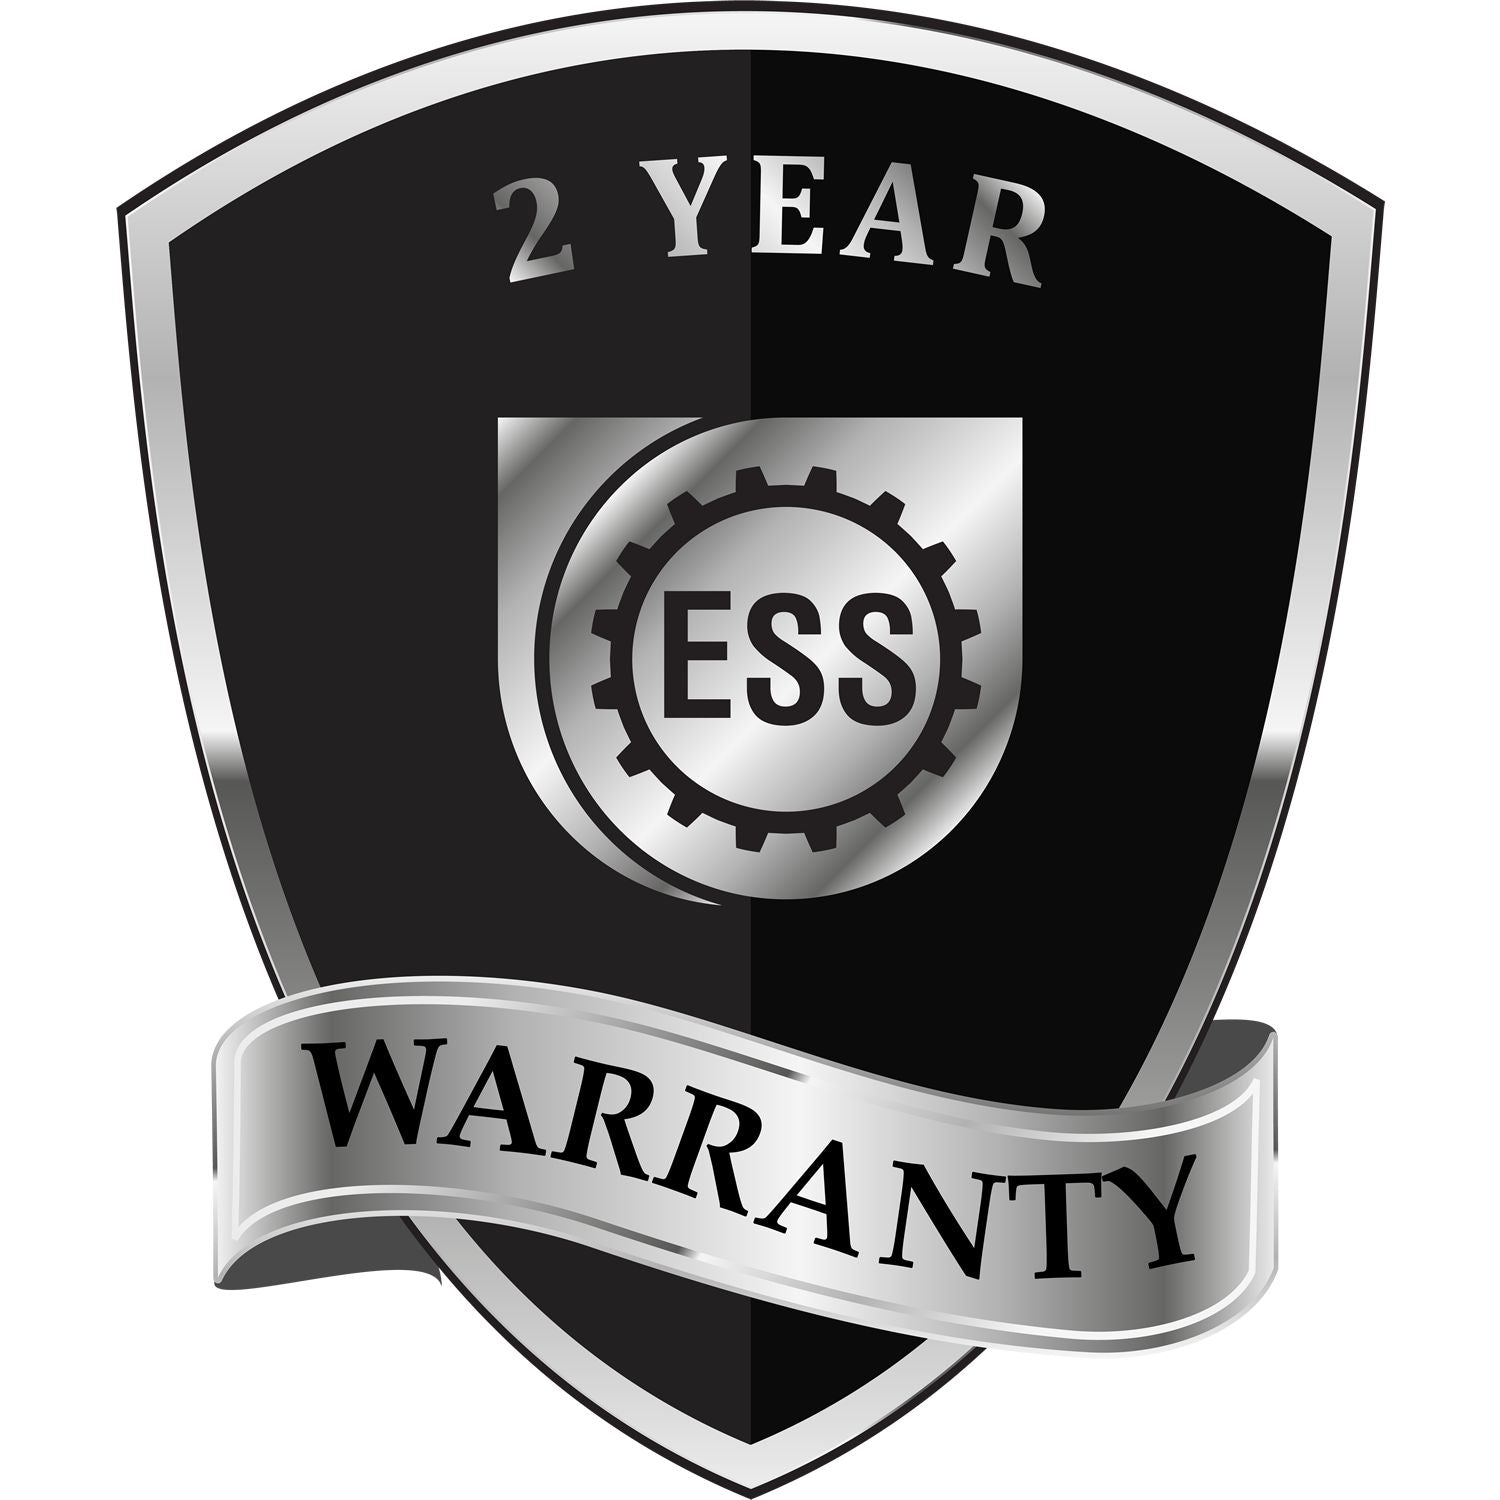 A badge or emblem showing a warranty icon for the State of Kentucky Handheld Landscape Architect Seal